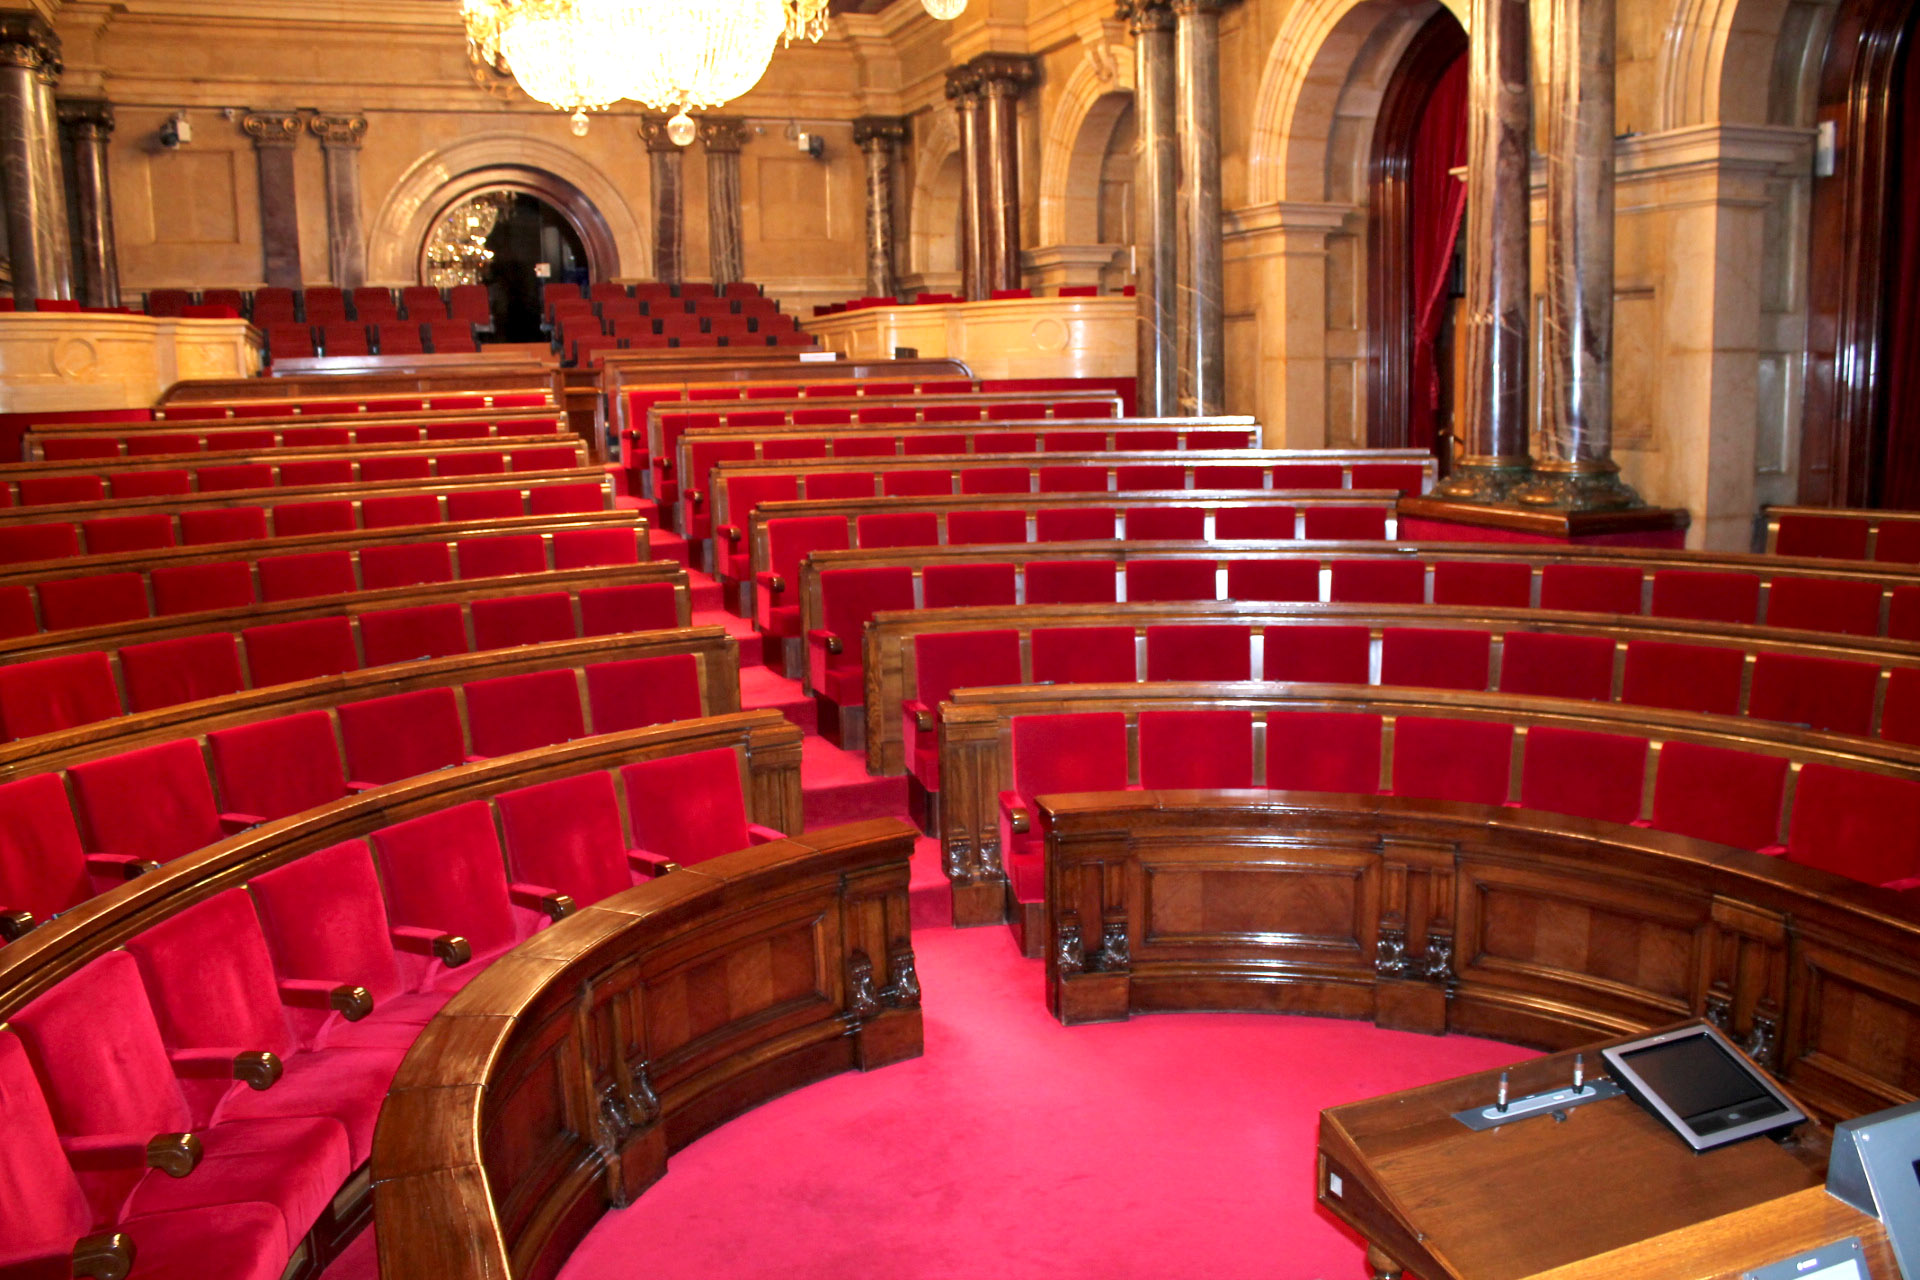 A shot of the empty seats at the Catalan Parliament on September 10 2015 (by the Catalan Parliament)